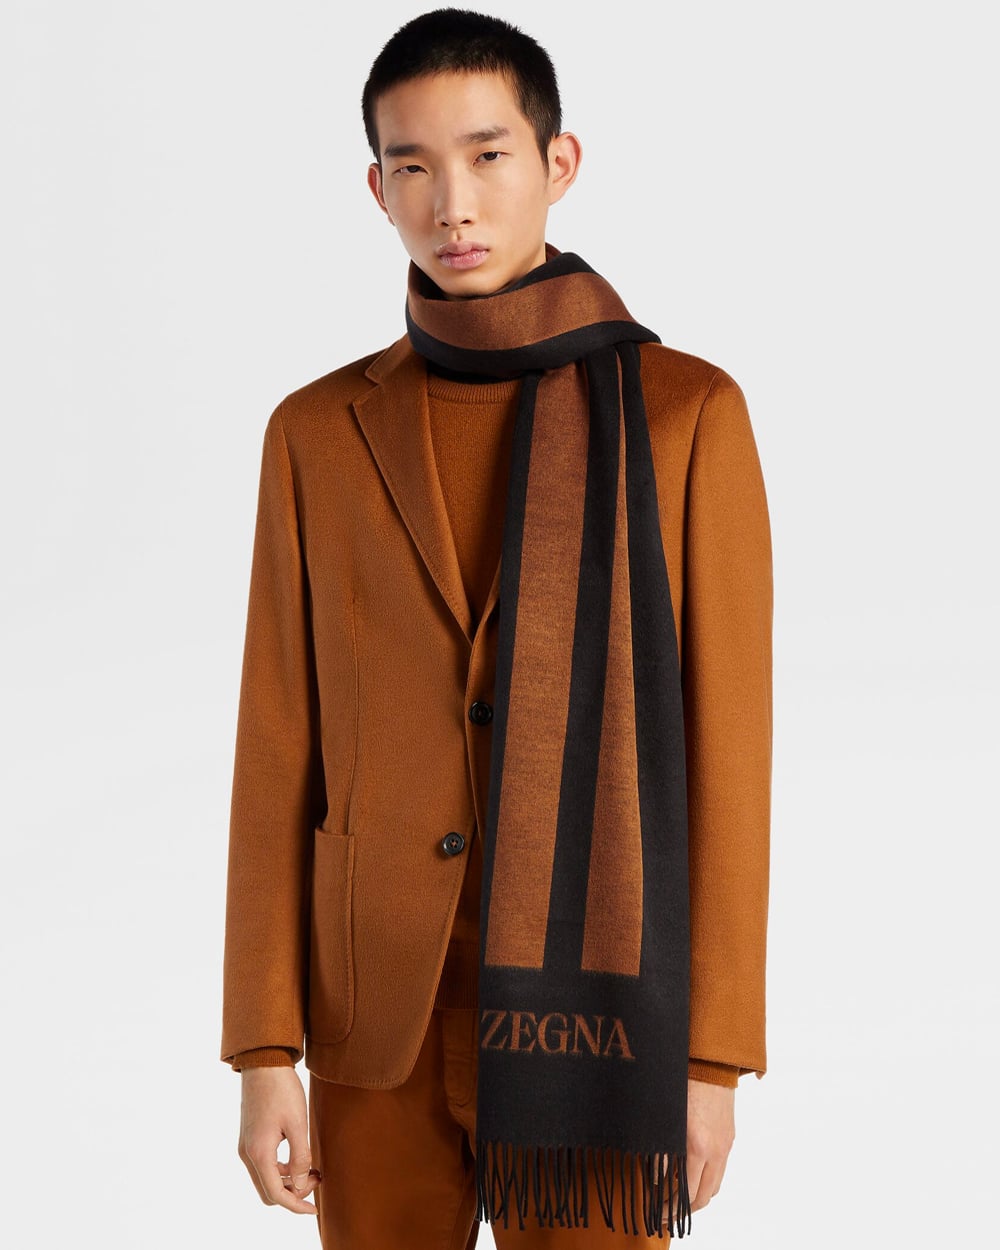 Man wearing a brown-orange blazer, pants and a black and brown Zegna scarf